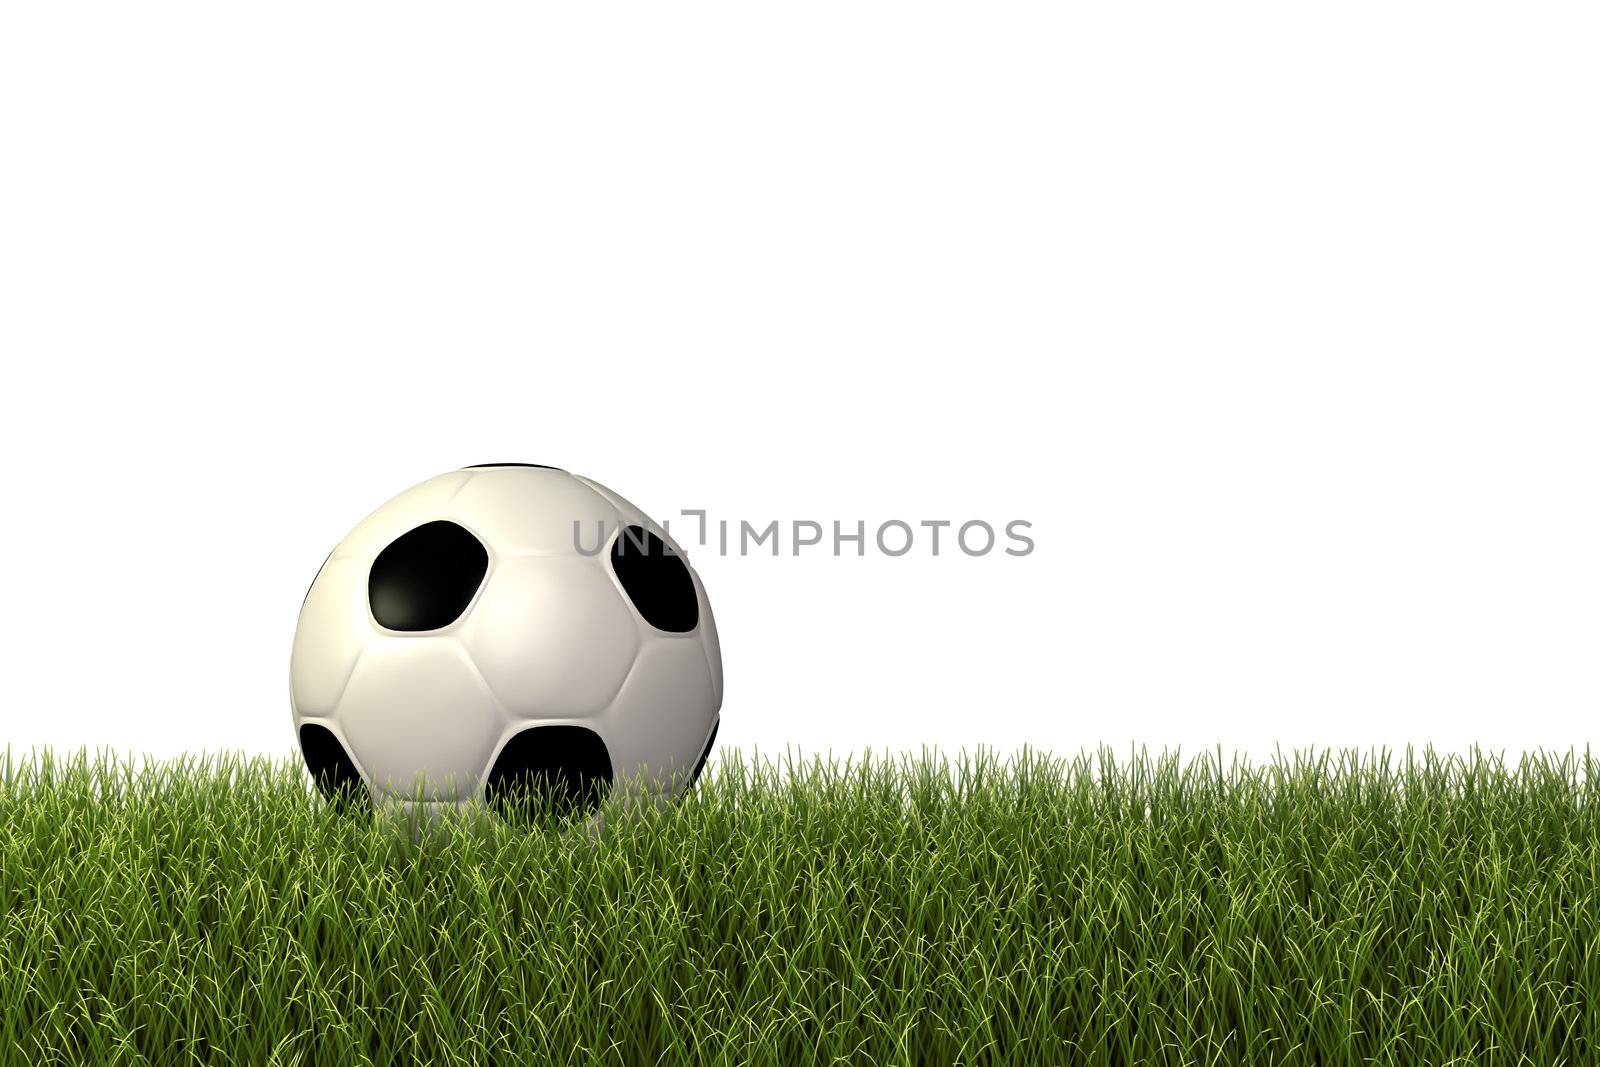 Image of  a football / soccerball on green grass.